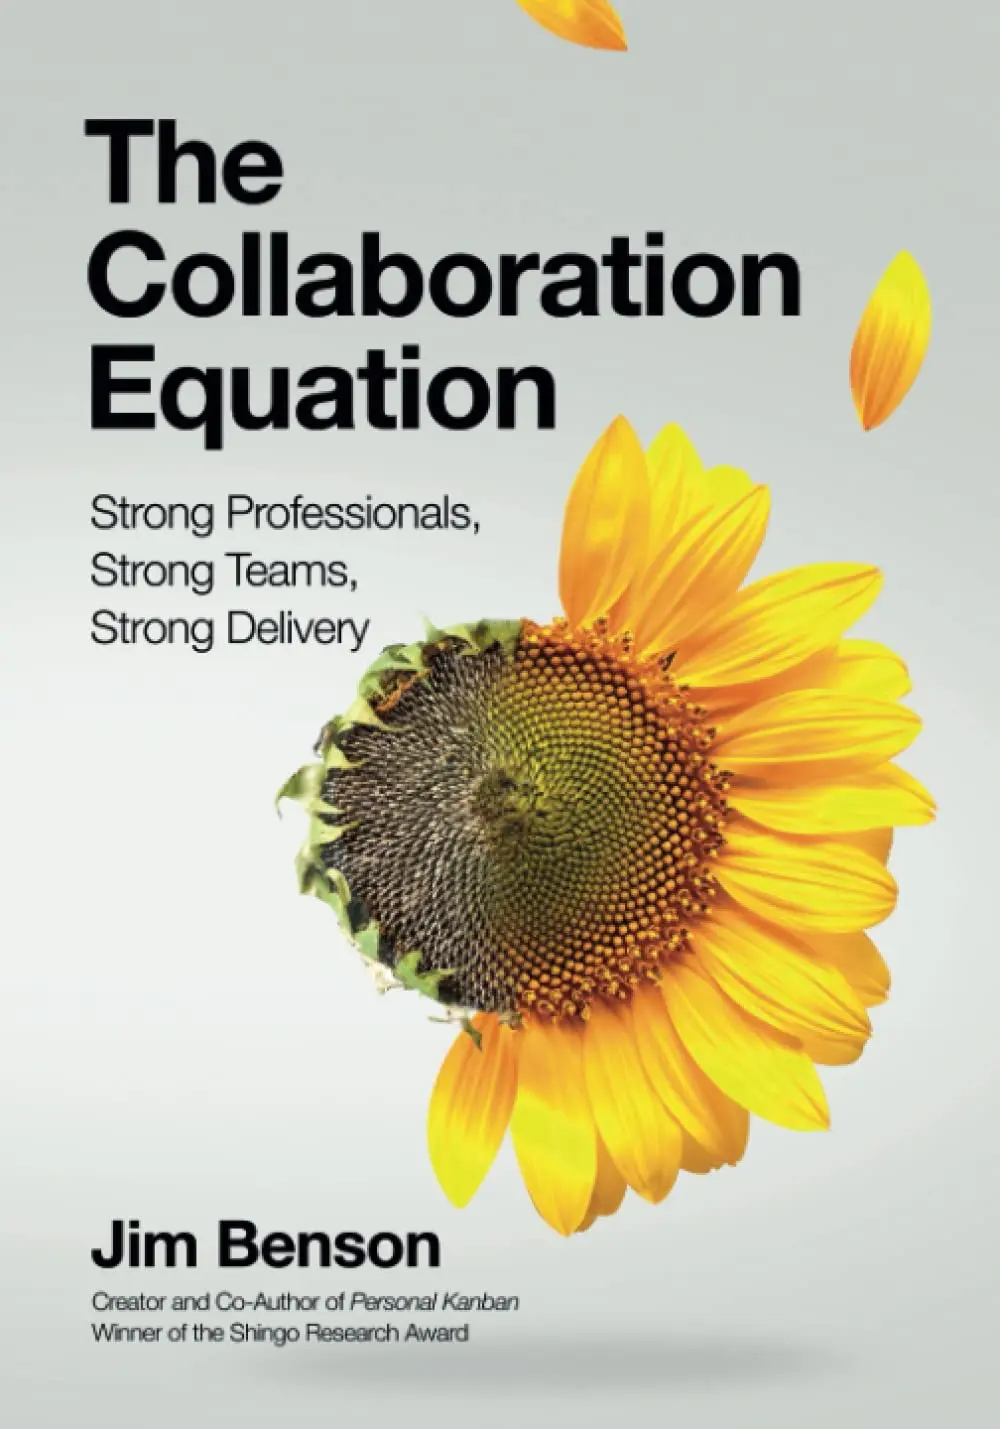 The Collaboration Equation cover features a sunflower whose bright yellow petals are falling off